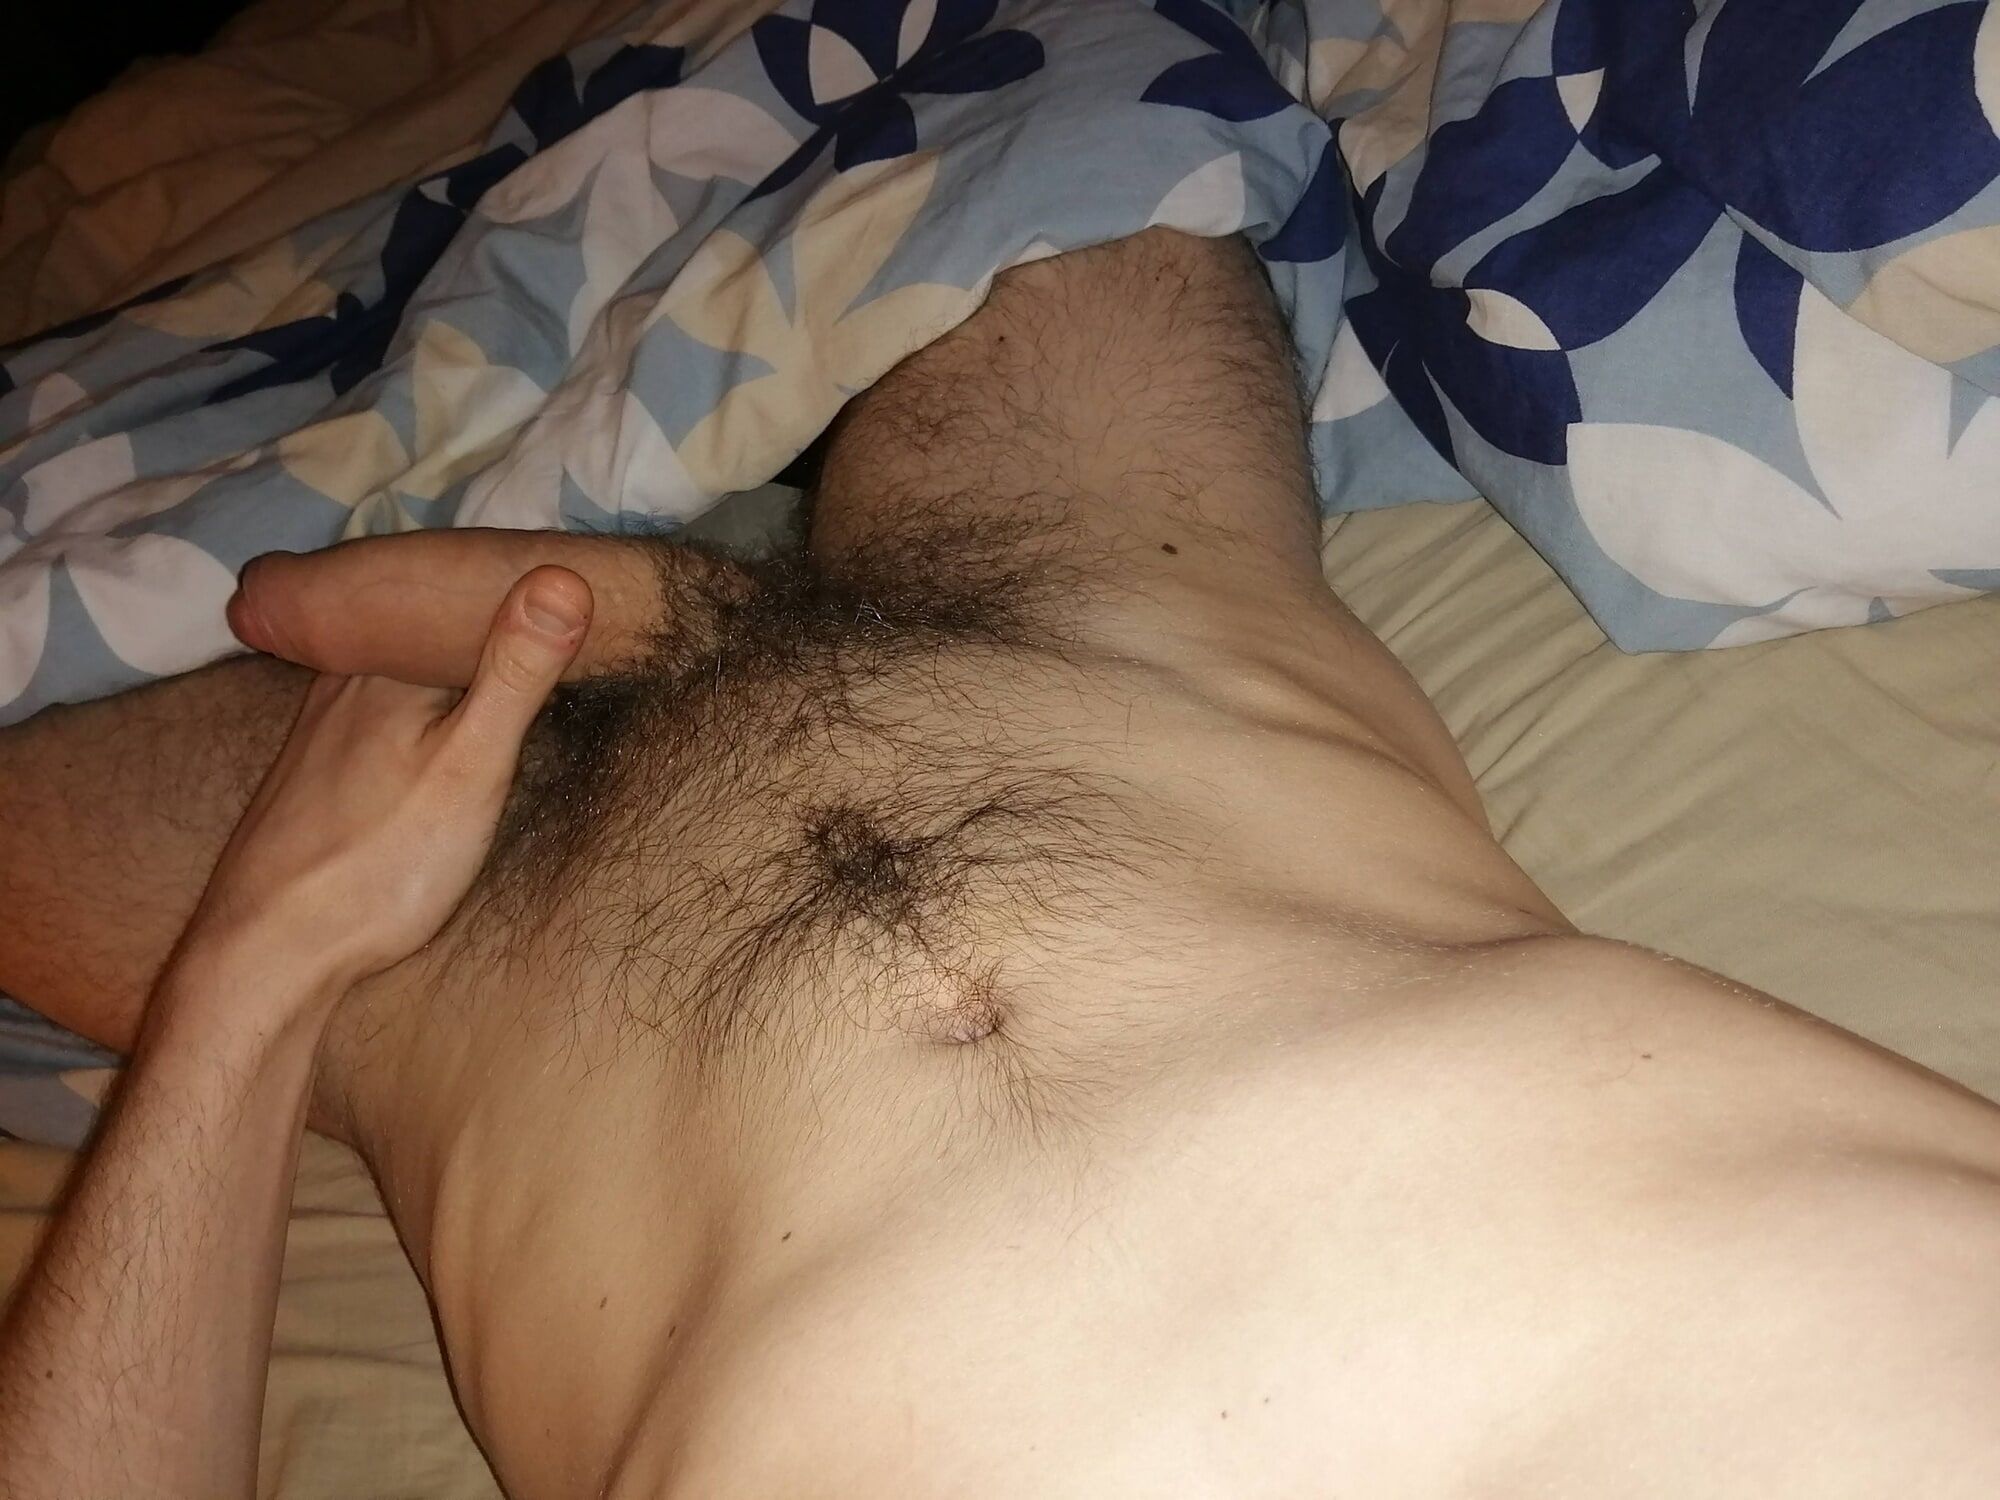 Me and my dick #17